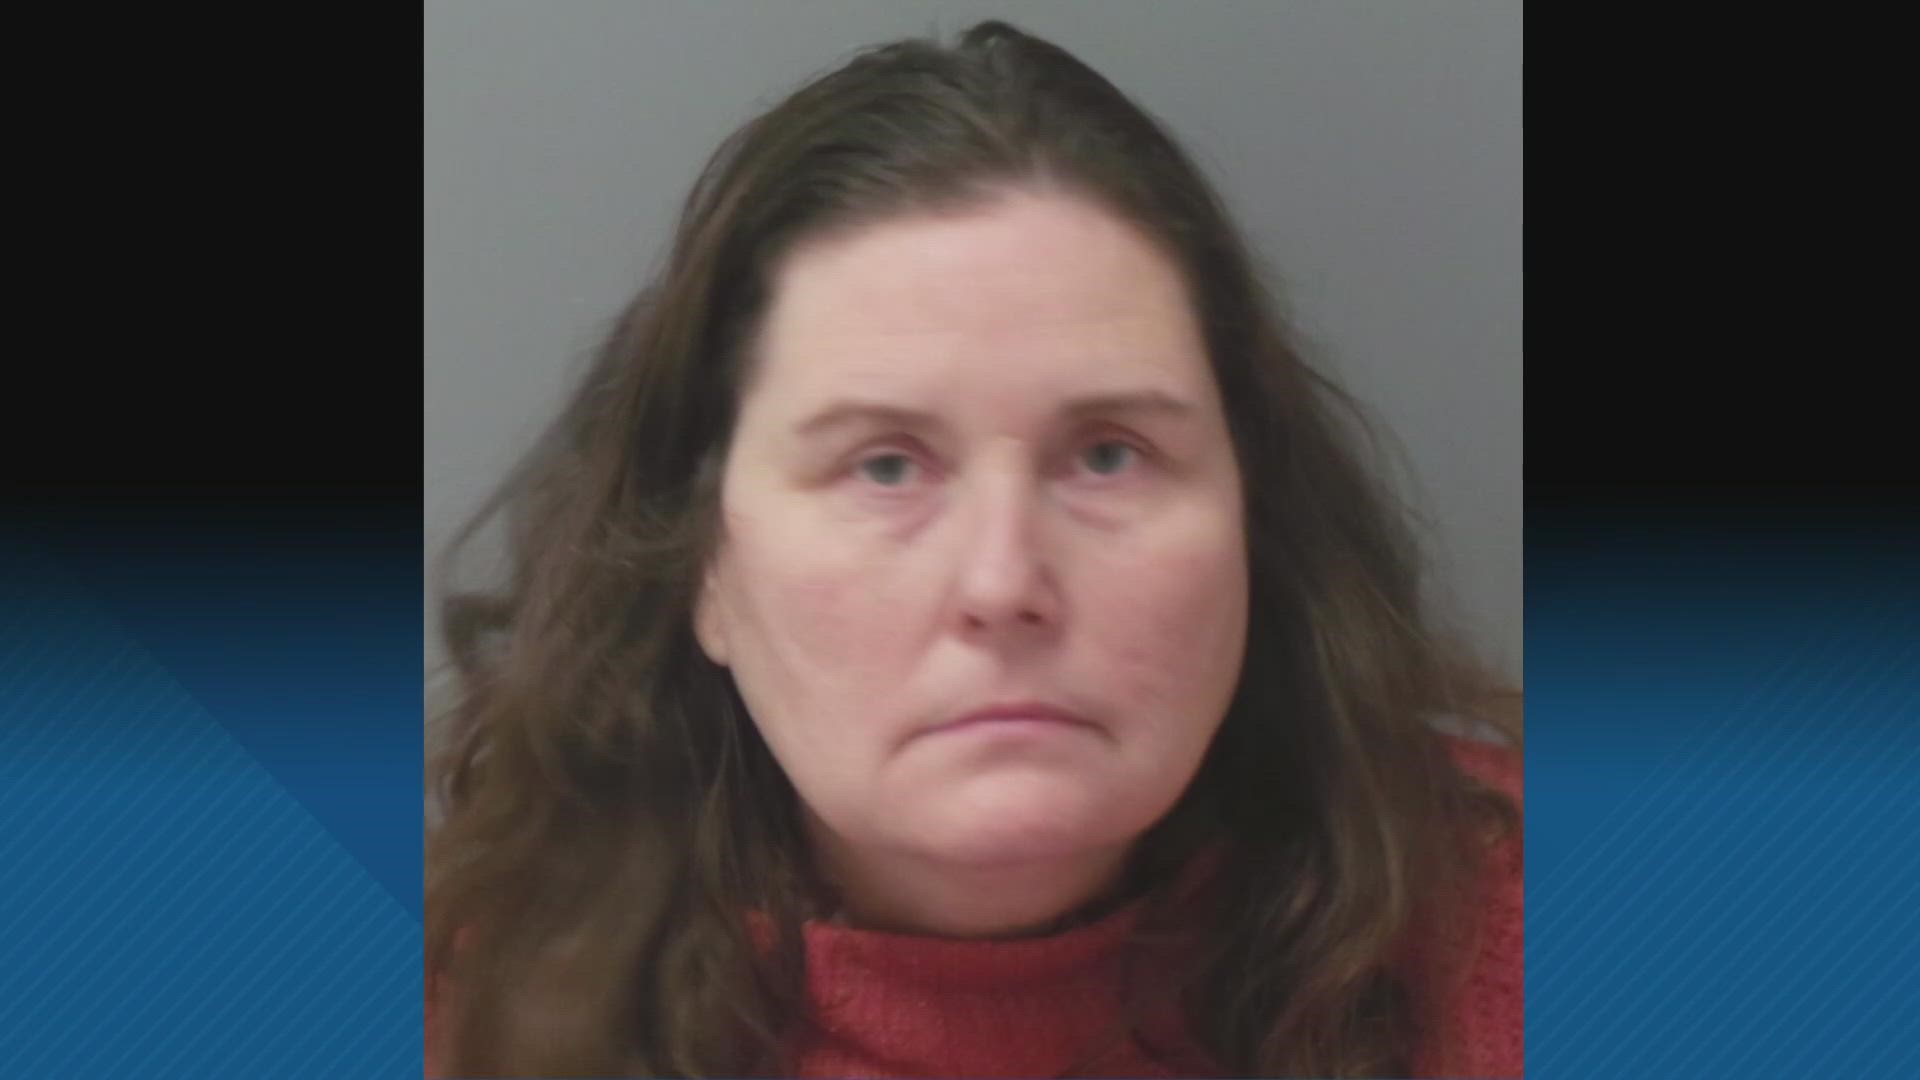 Kline is currently not in the custody and a warrant has been issued, according to police. The above mug shot is from her arrest on Jan. 5, 2022.